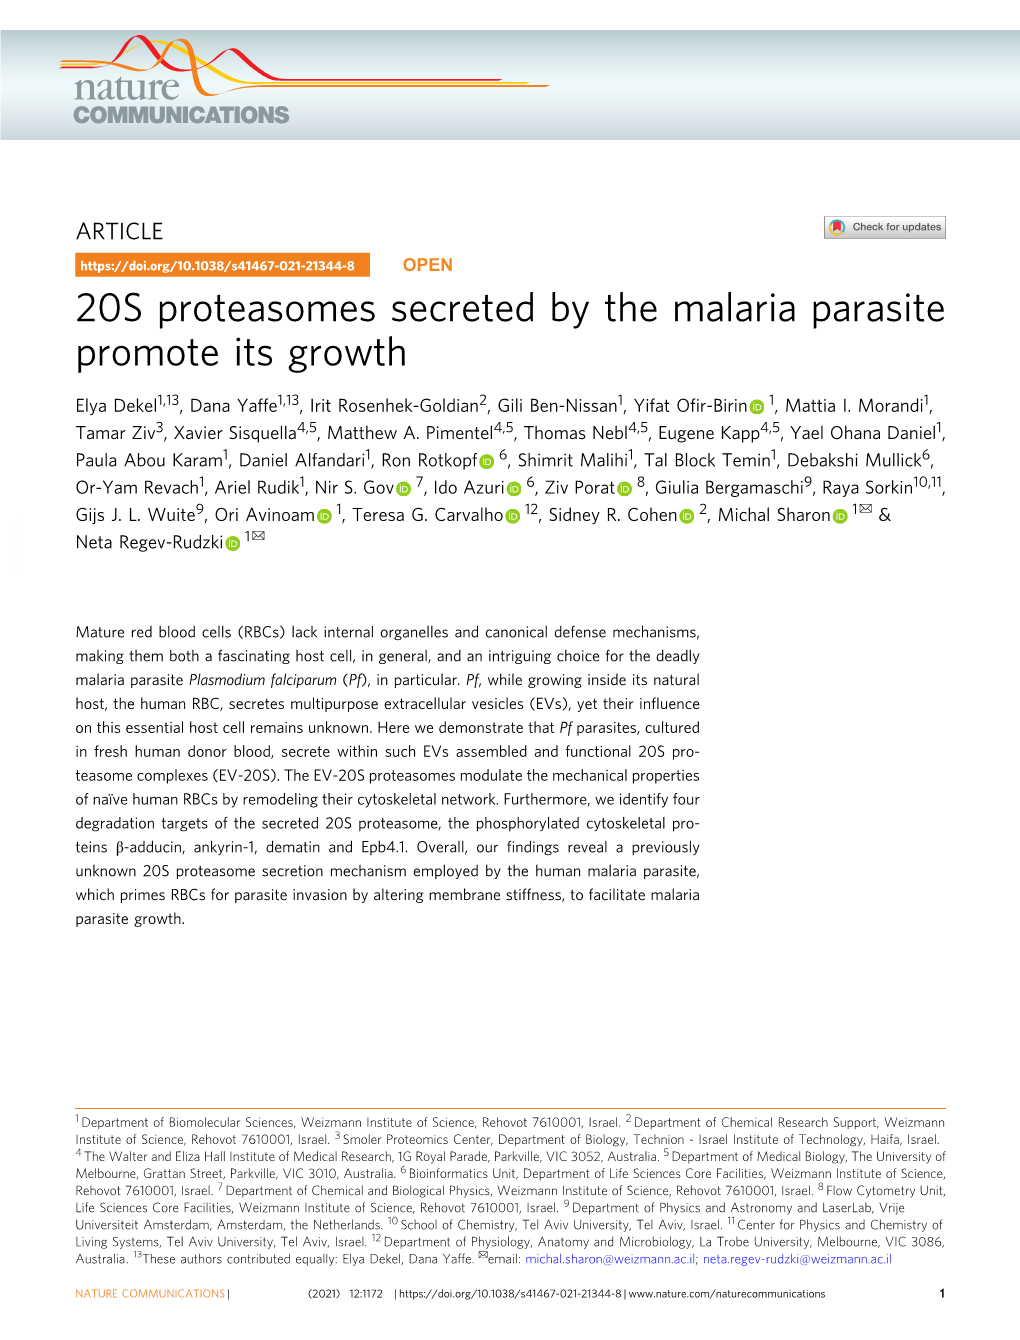 20S Proteasomes Secreted by the Malaria Parasite Promote Its Growth